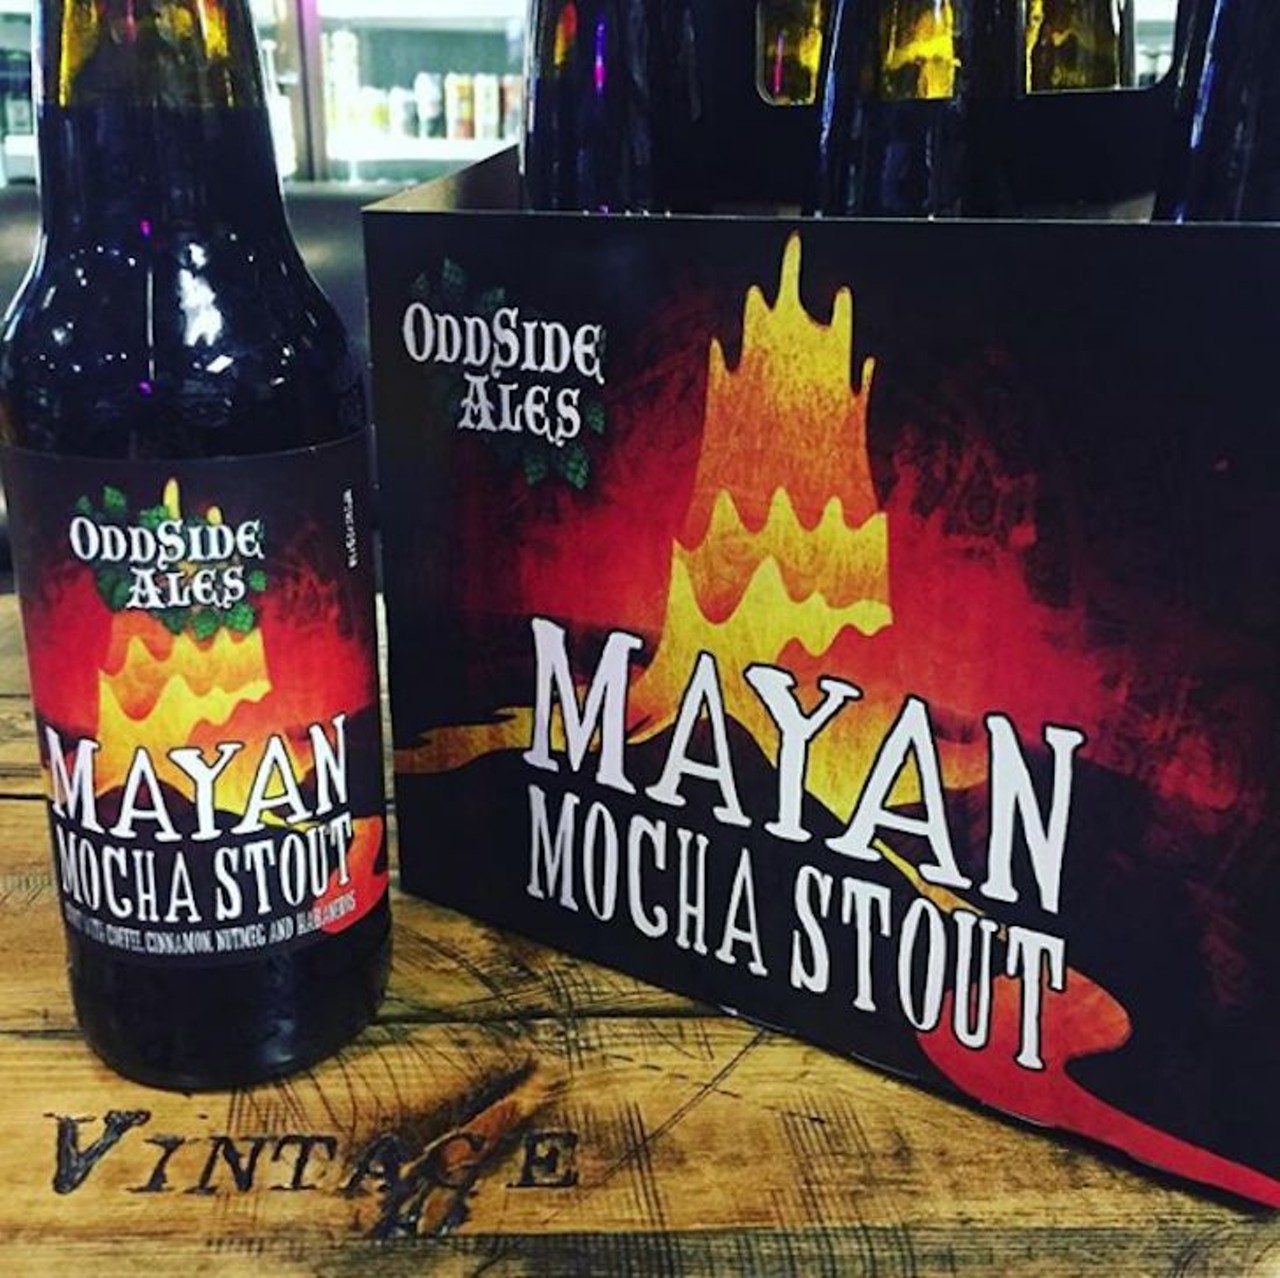 Odd Side Ales&#146; Mayan Mocha Stout
Grand Haven - 6.50%
This Mayan Mocha Stout from Grand Haven&#146;s Odd Side Ales features the warm taste of habanero, cinnamon, nutmeg, and chocolate for a grown-up take on a Mexican hot cholate.
Photo courtesy of @vintage.estate.wine.beer